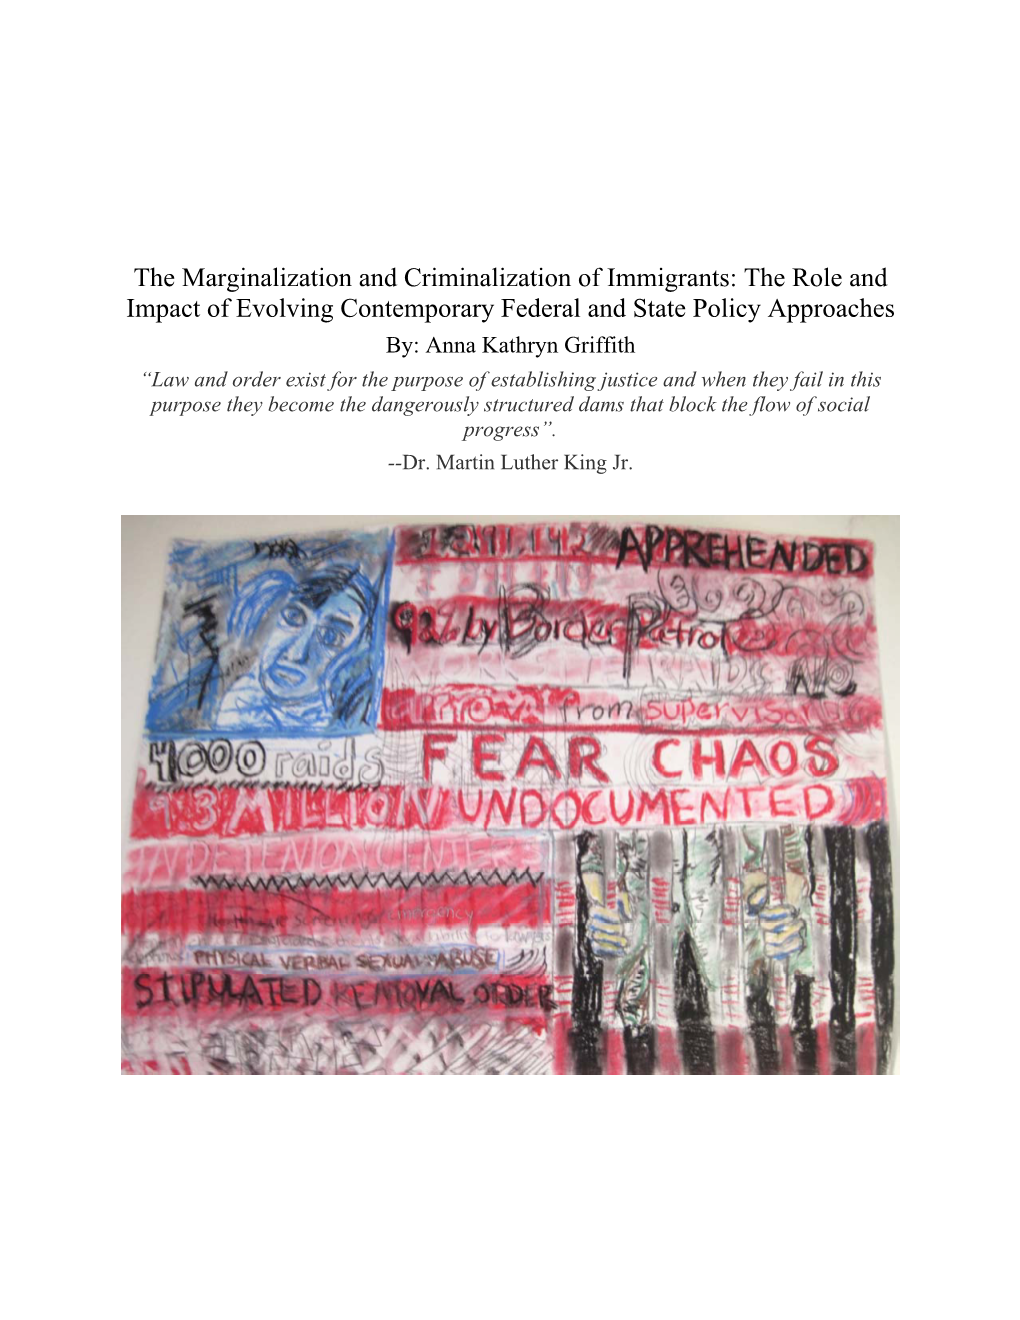 The Marginalization and Criminalization of Immigrants